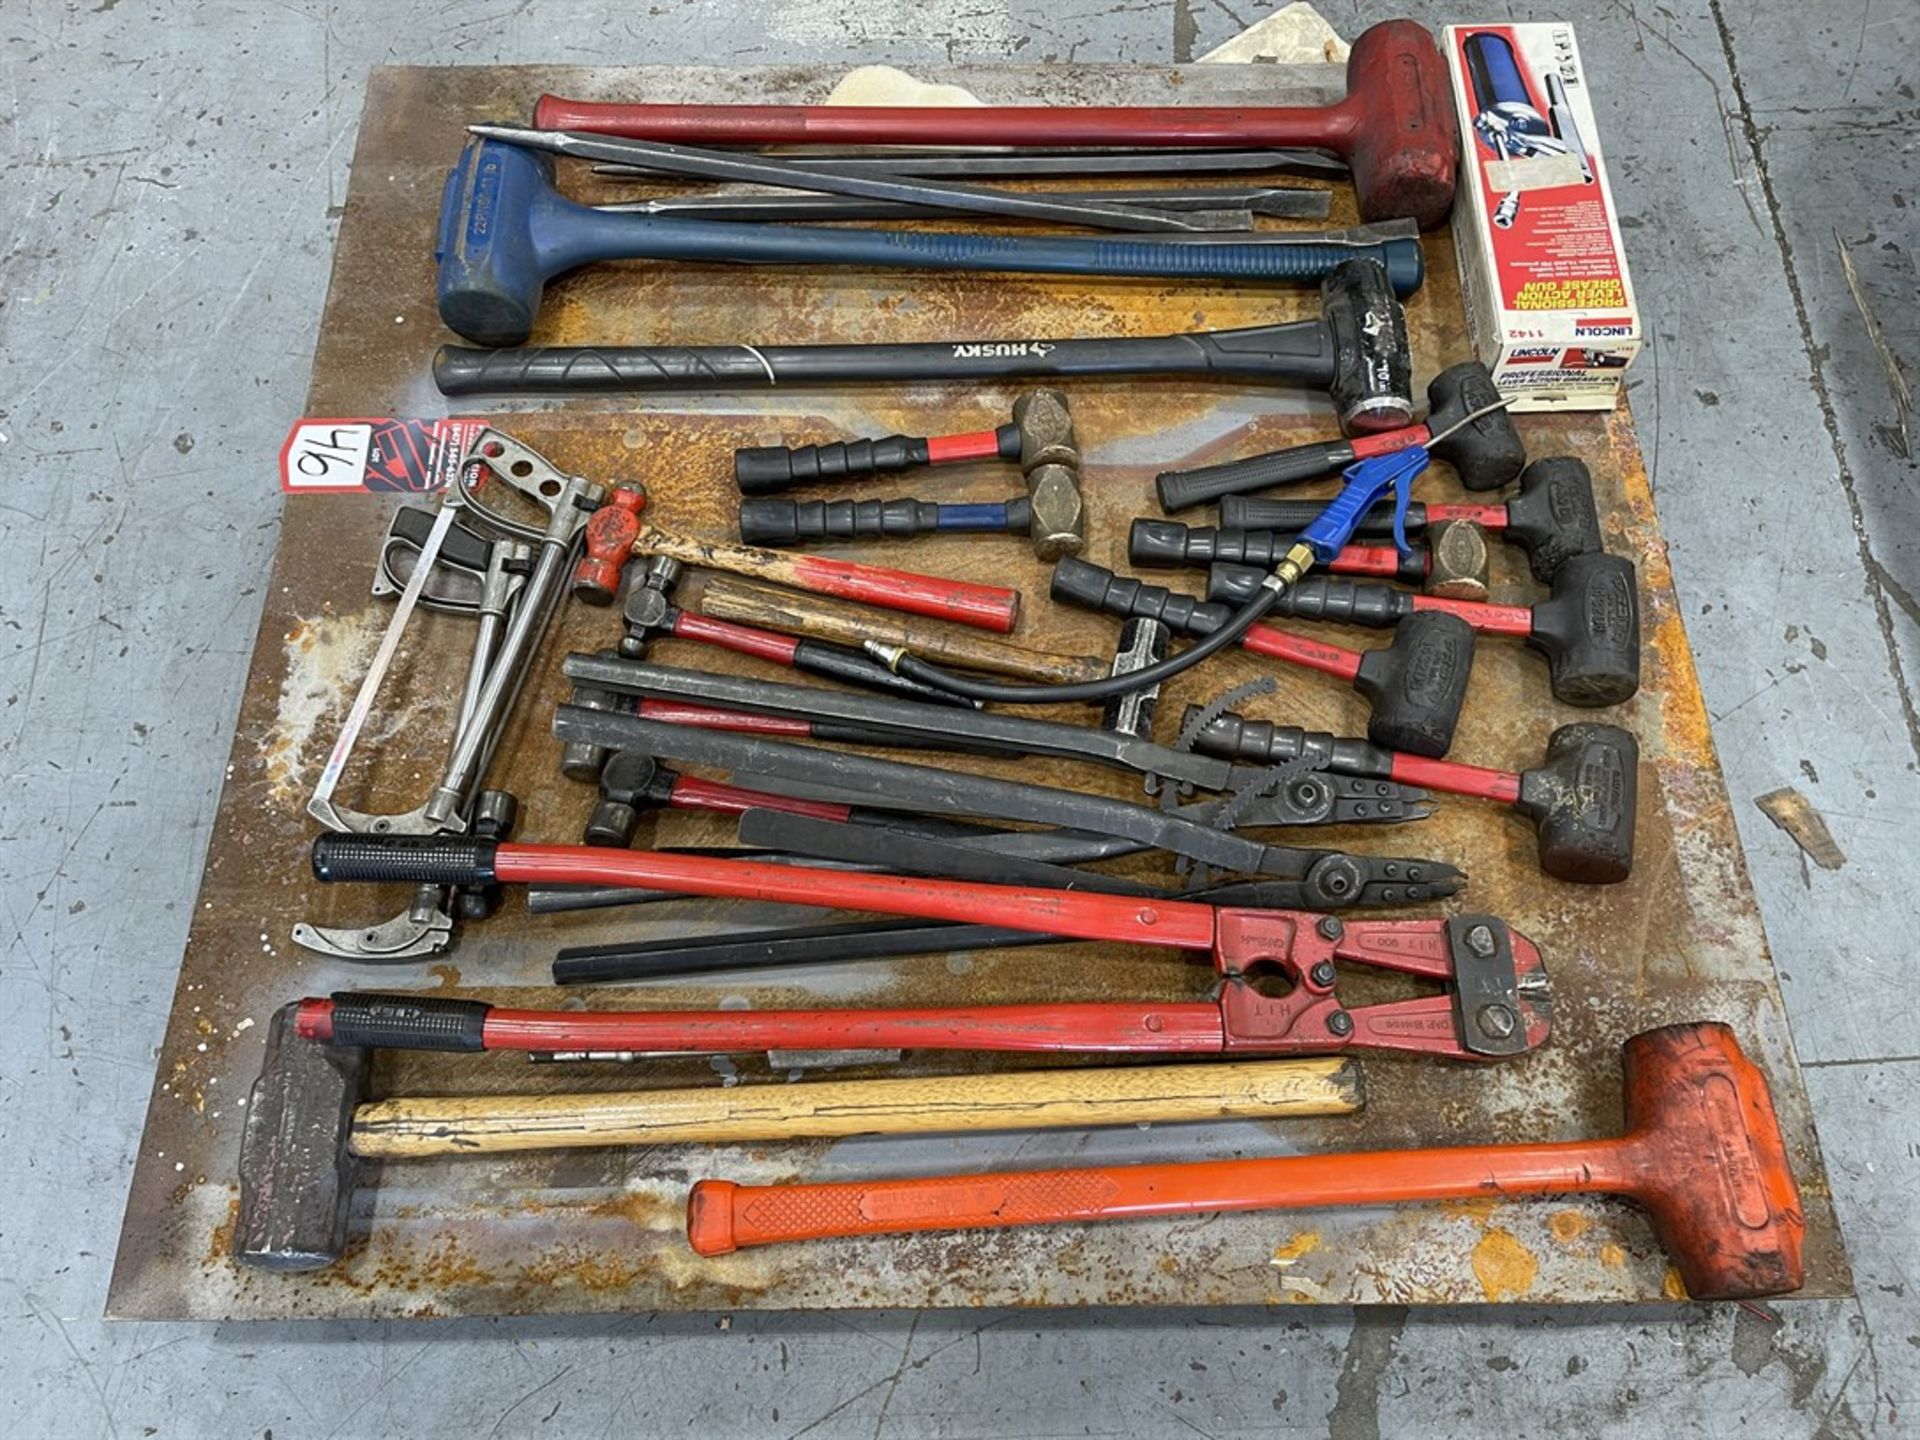 Lot of Sledge Hammers, Bolt Cutter and Pry Bars